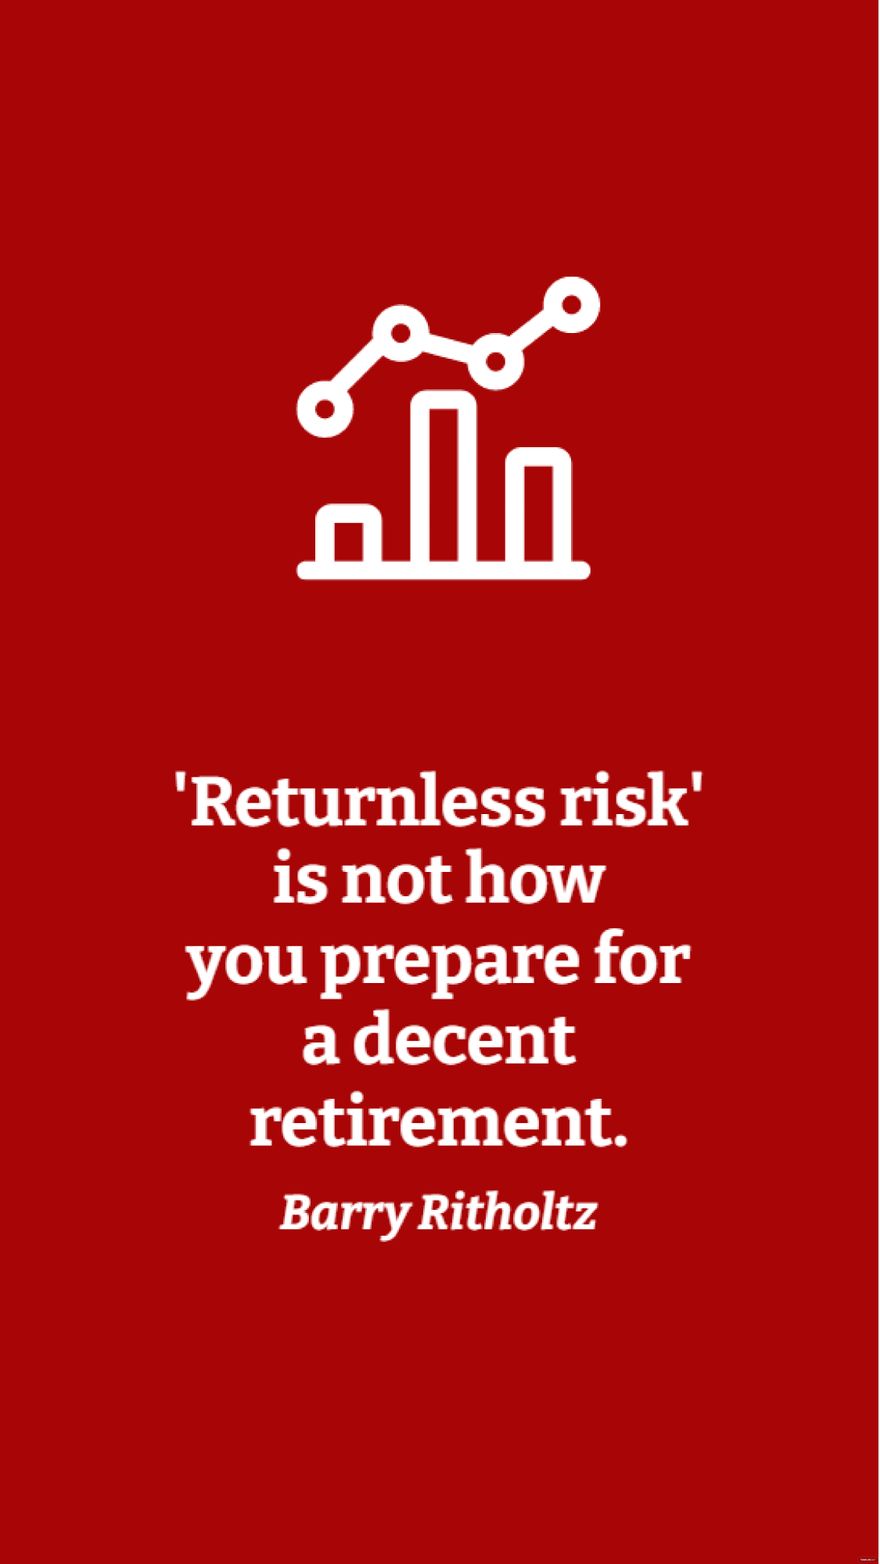 Free Barry Ritholtz - 'Returnless risk' is not how you prepare for a decent retirement.